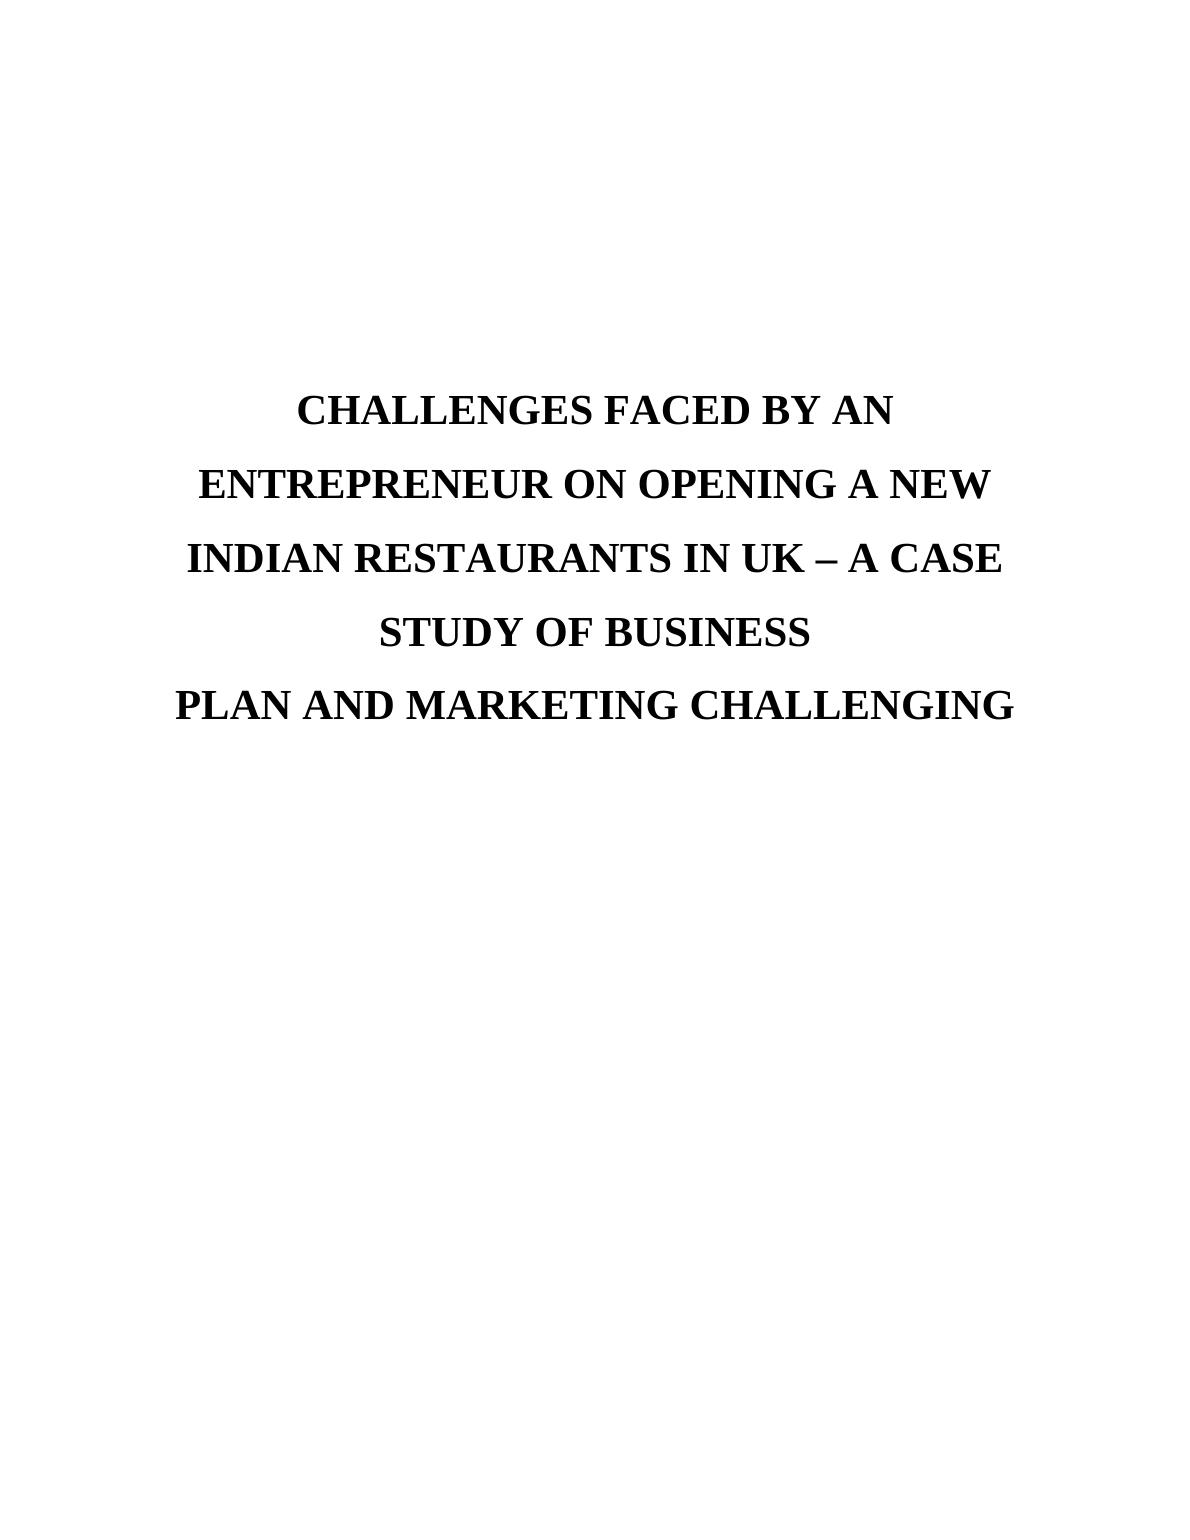 Challenges Faced by an Entrepreneur on Opening a New Indian Restaurant in UK_1